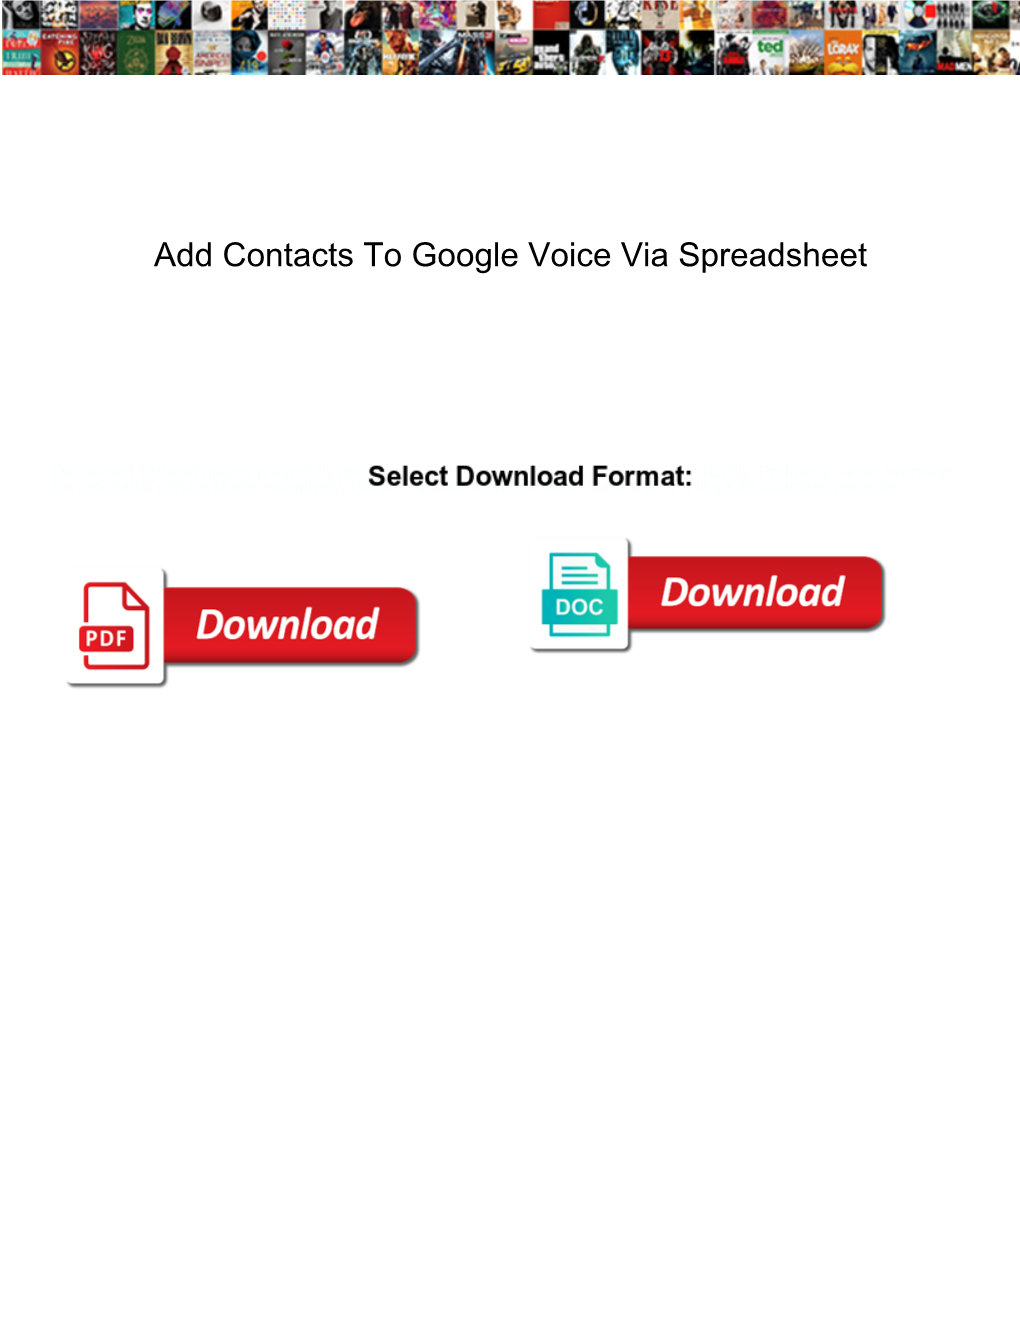 Add Contacts to Google Voice Via Spreadsheet